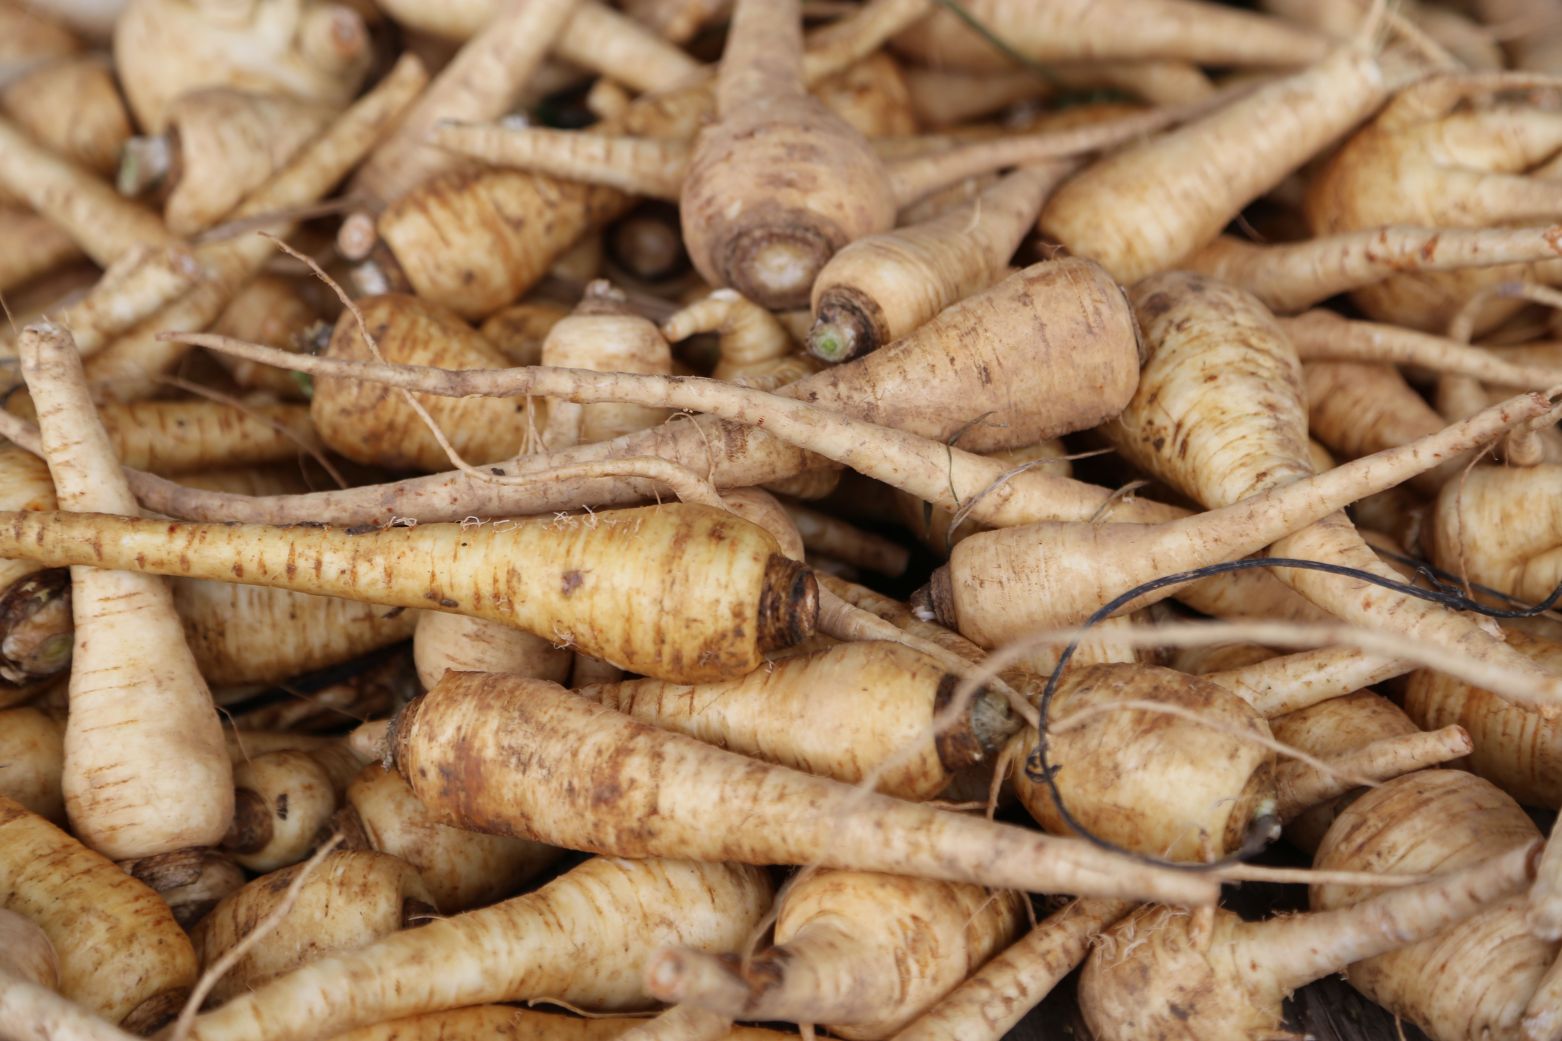 Parsnips from local farmers market